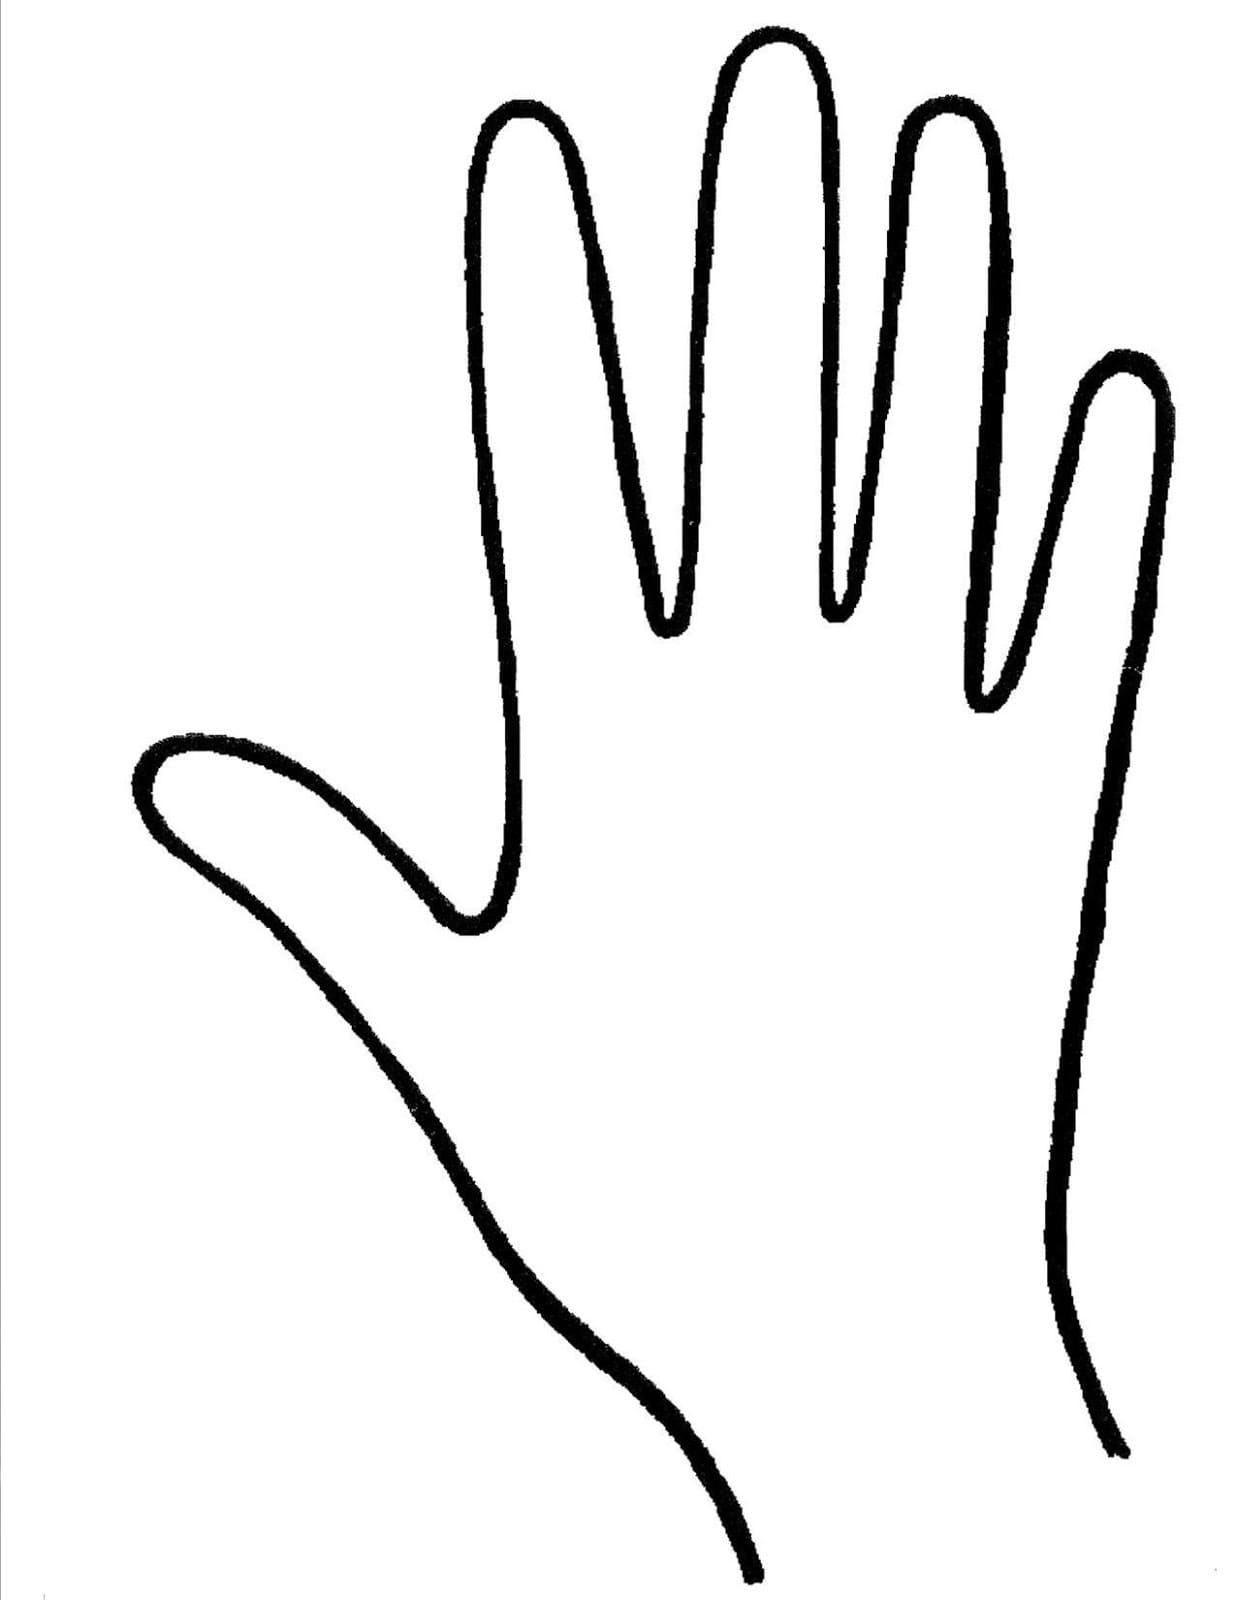 a simple line drawing of a stretched hand, palm open